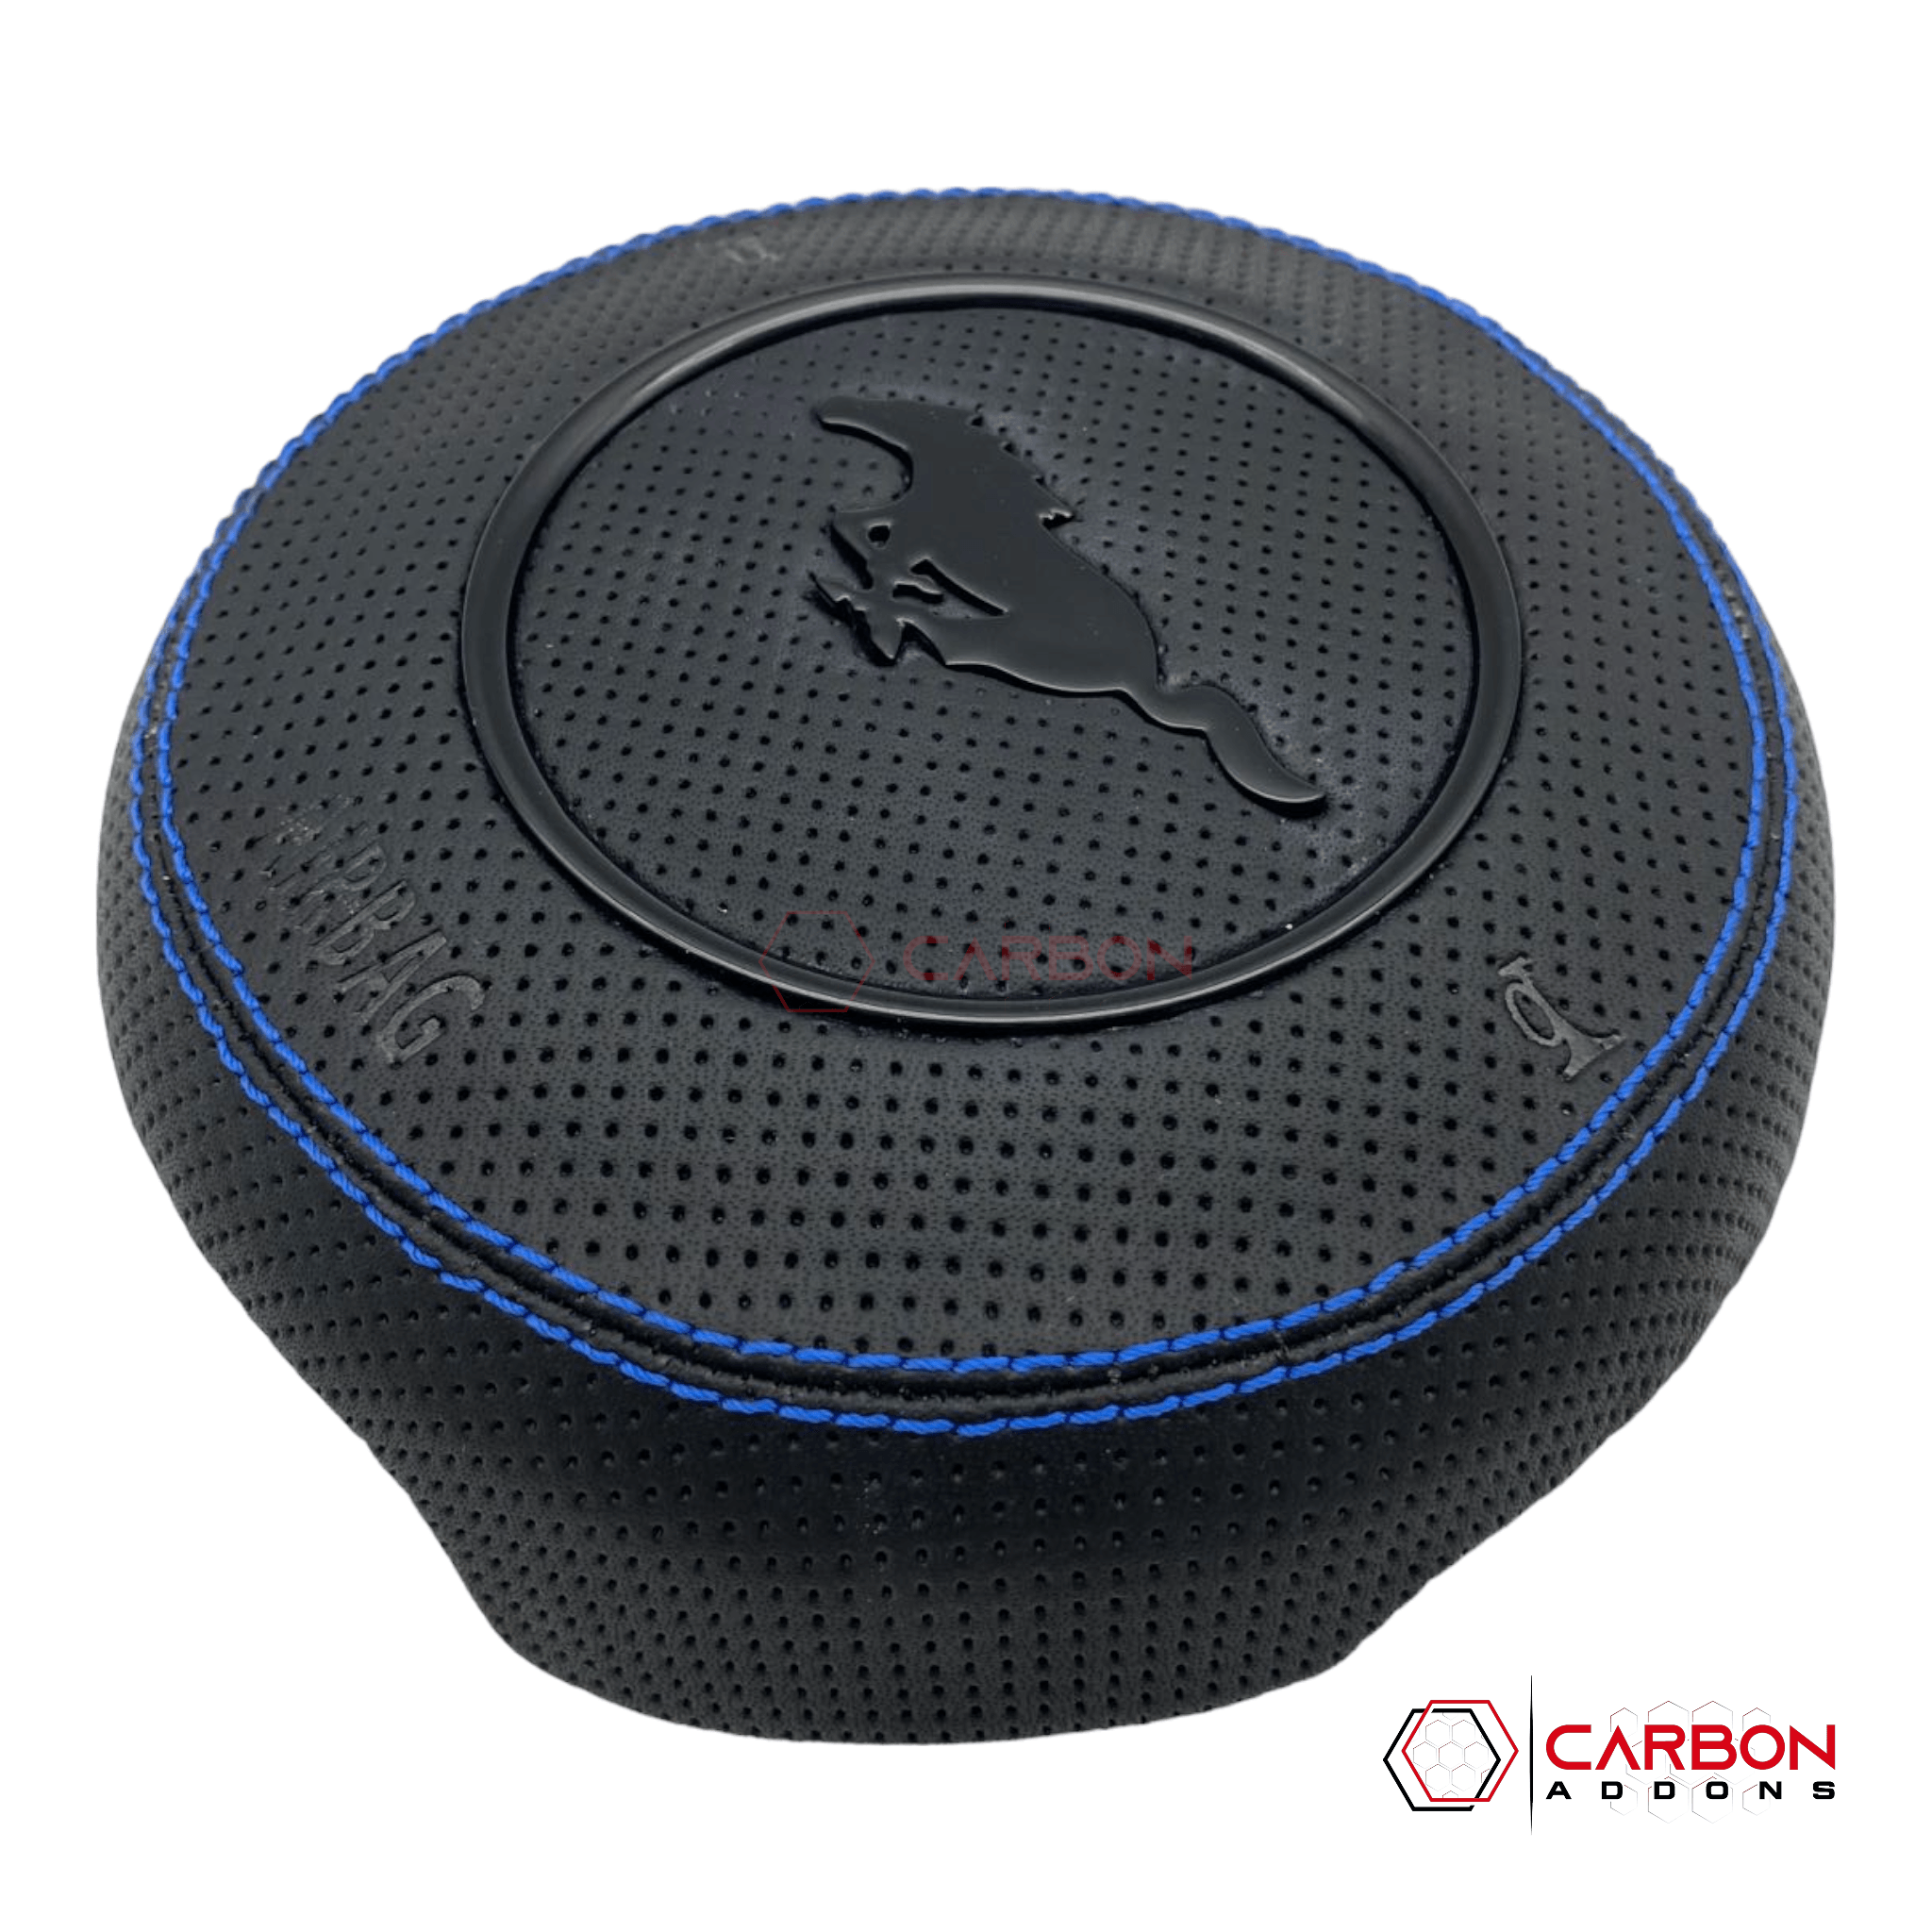 Custom Steering Wheel Airbag Housing for 2015-2023 Ford Mustang - carbonaddons Carbon Fiber Parts, Accessories, Upgrades, Mods